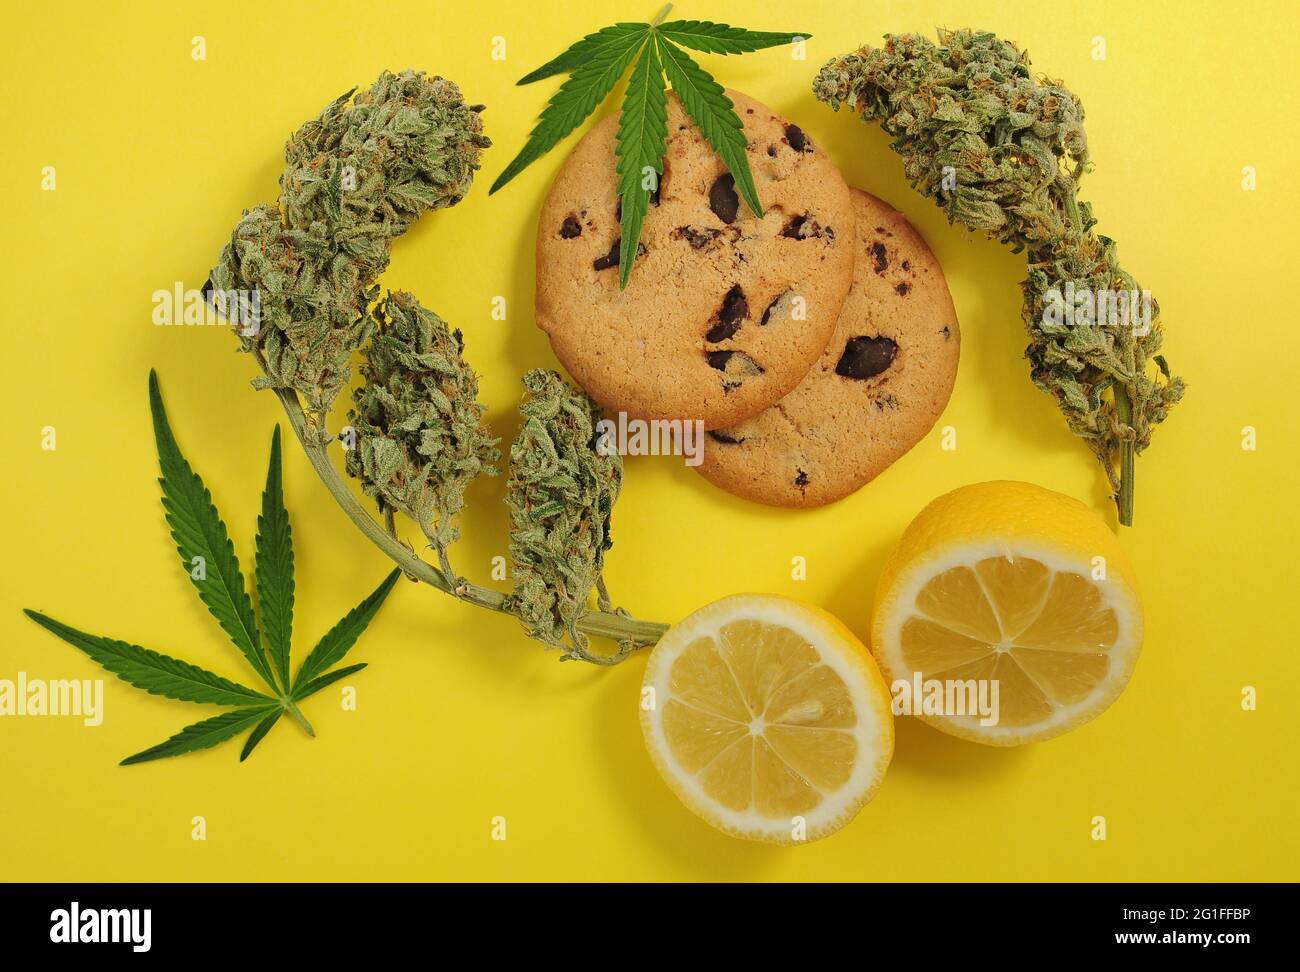 Cannabis edibles. Chocolate cookies with CBD oil. Marijuana buds with lemon flavor on yellow background. Cannabis leaves and flowers isolated close-up Stock Photo